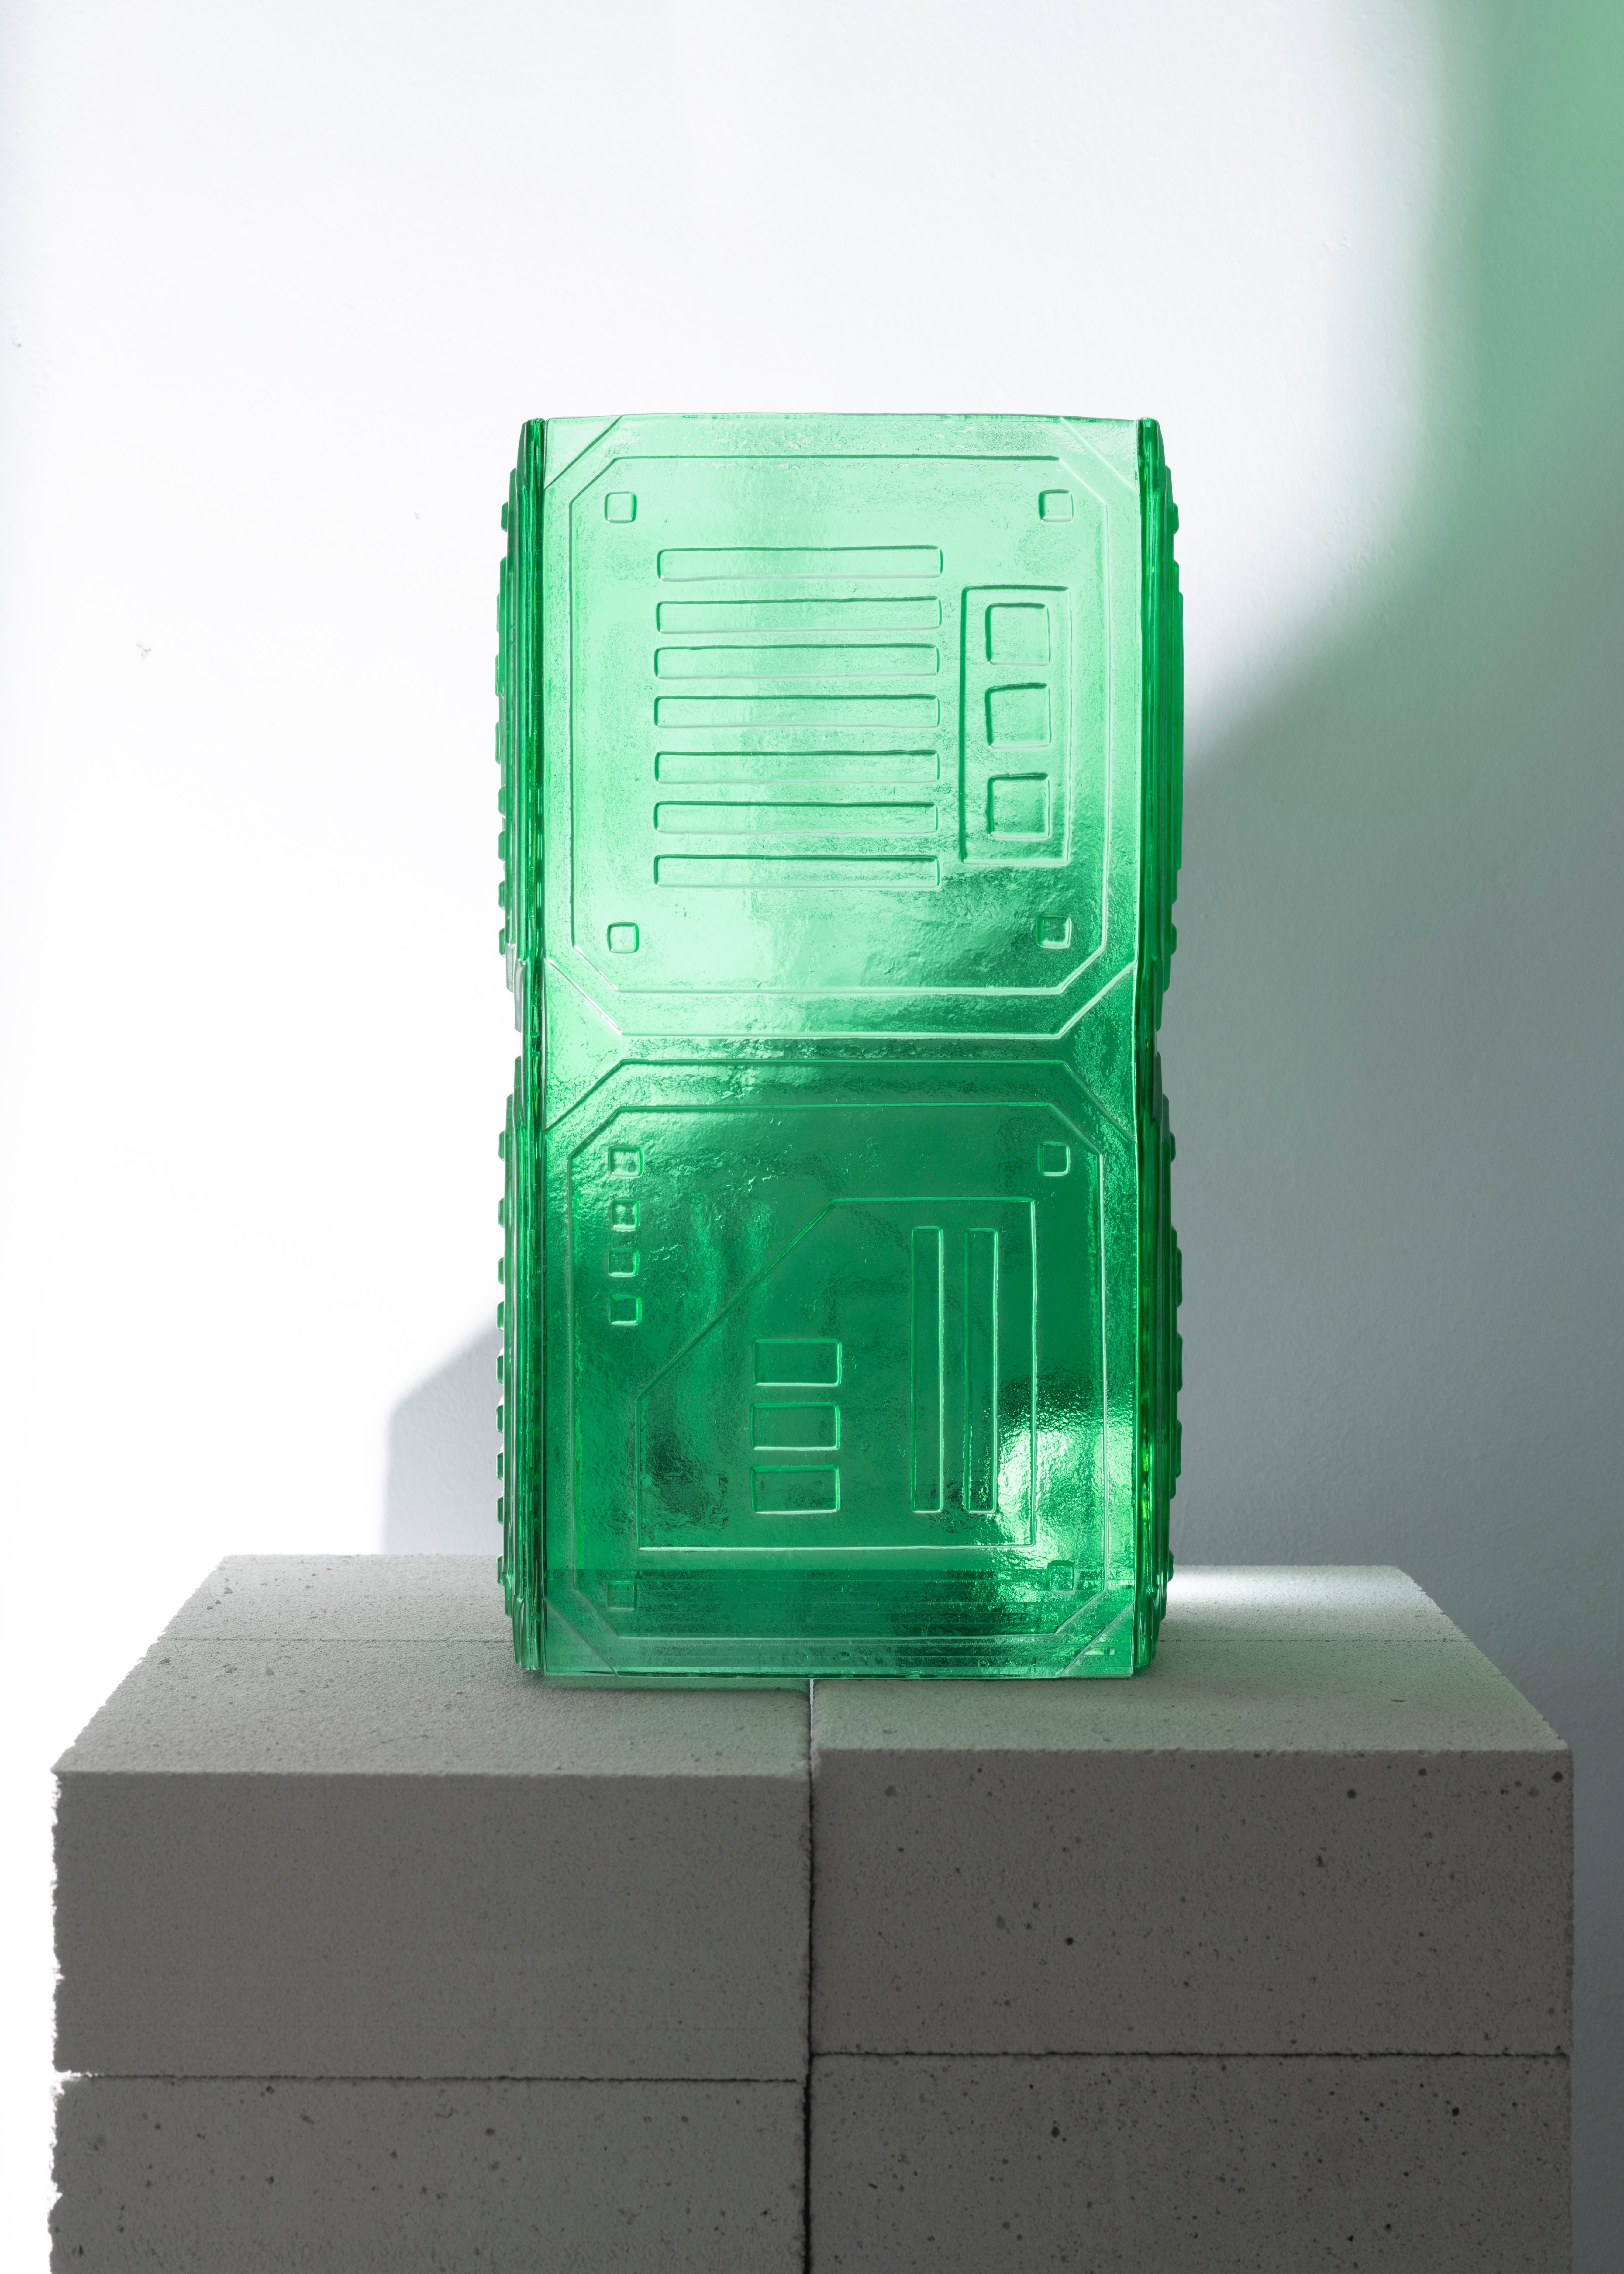 Analogic Sci-Fi Green Vase by Mut Design
Limited Edition
Dimensions: D 25 x W 25 x H 45 cm.
Materials: Glass colored.

Inspired by computer motherboards and the flamboyant spacecrafts of the Starwars saga, this very limited edition of sci-fi vases